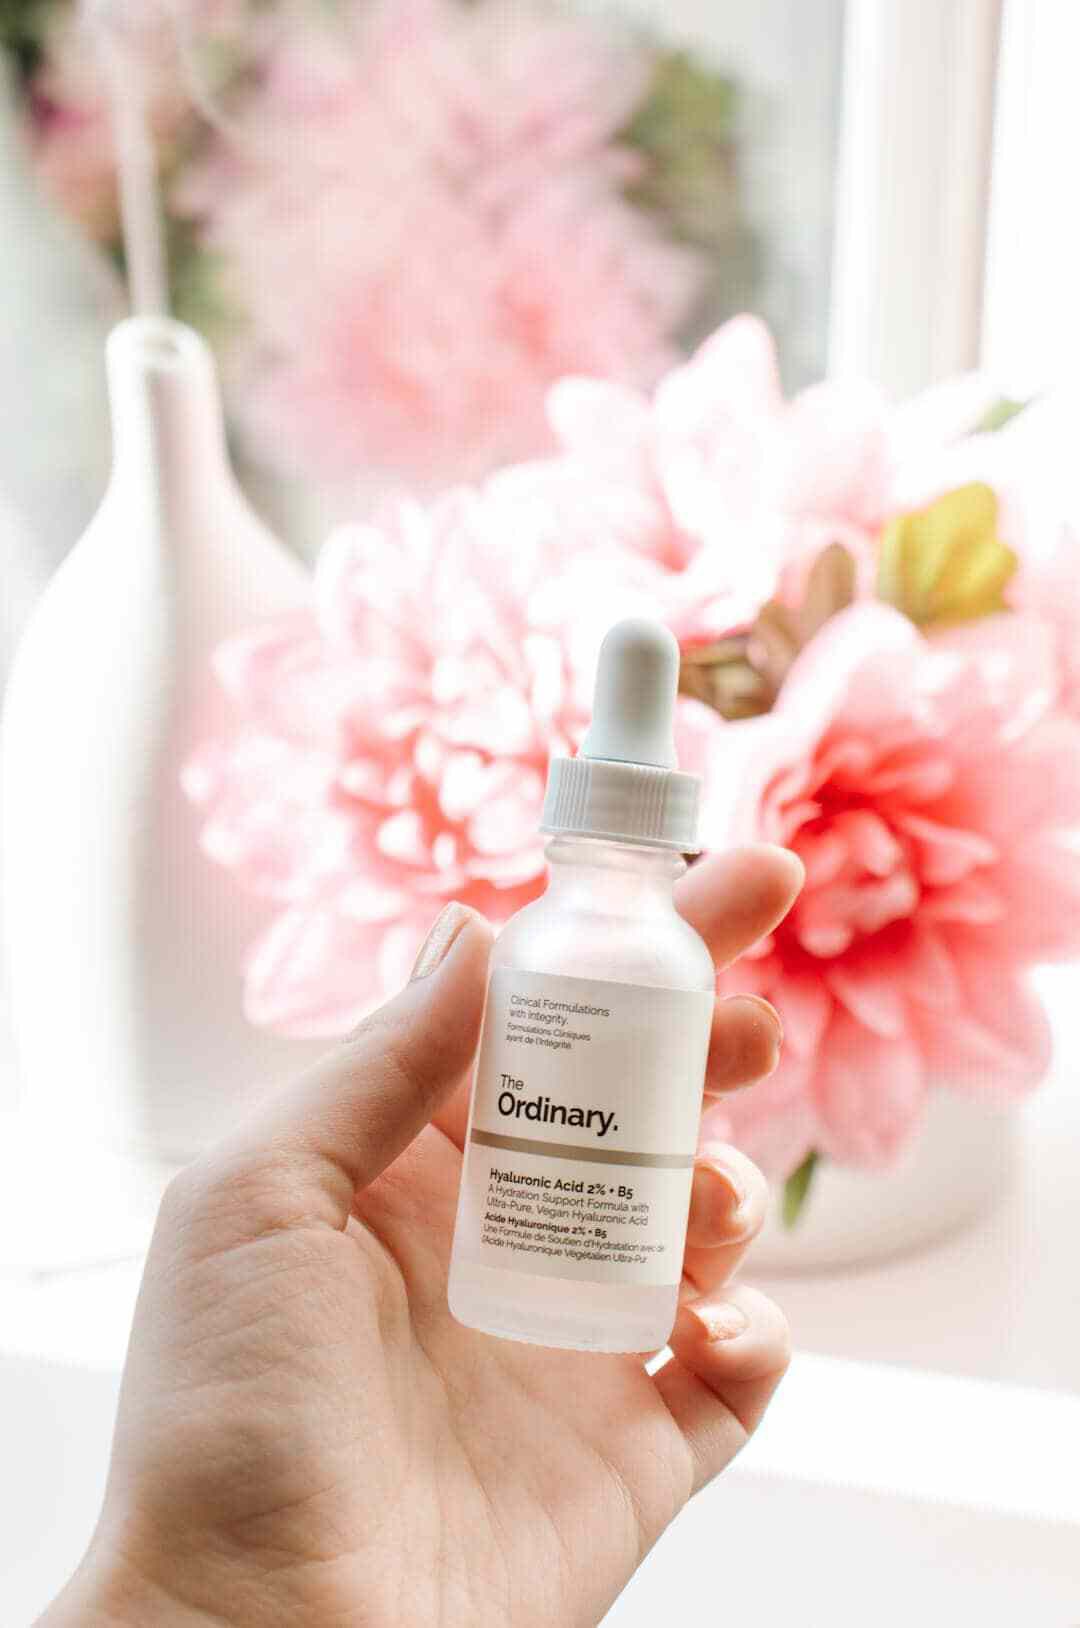 The Ordinary Hyaluronic Acid Skincare Routine